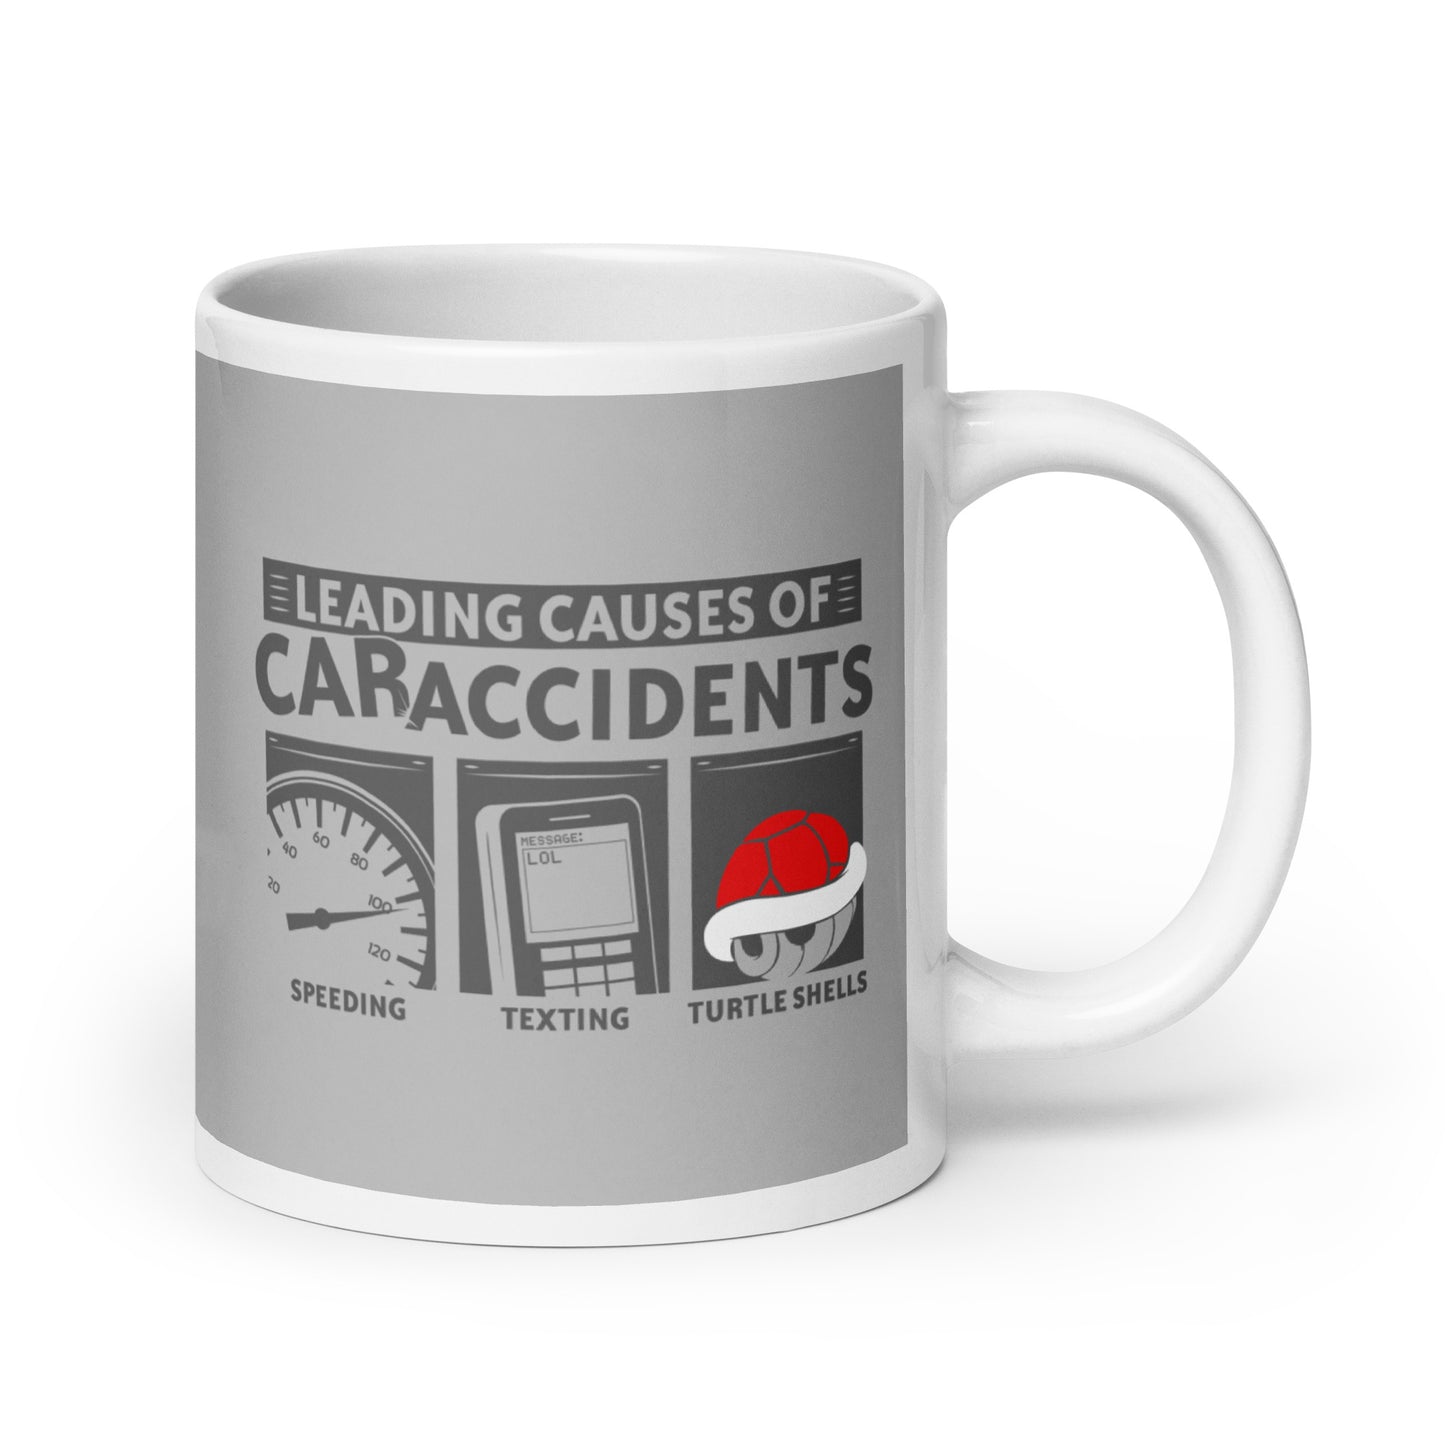 Leading Causes of Accidents Mug